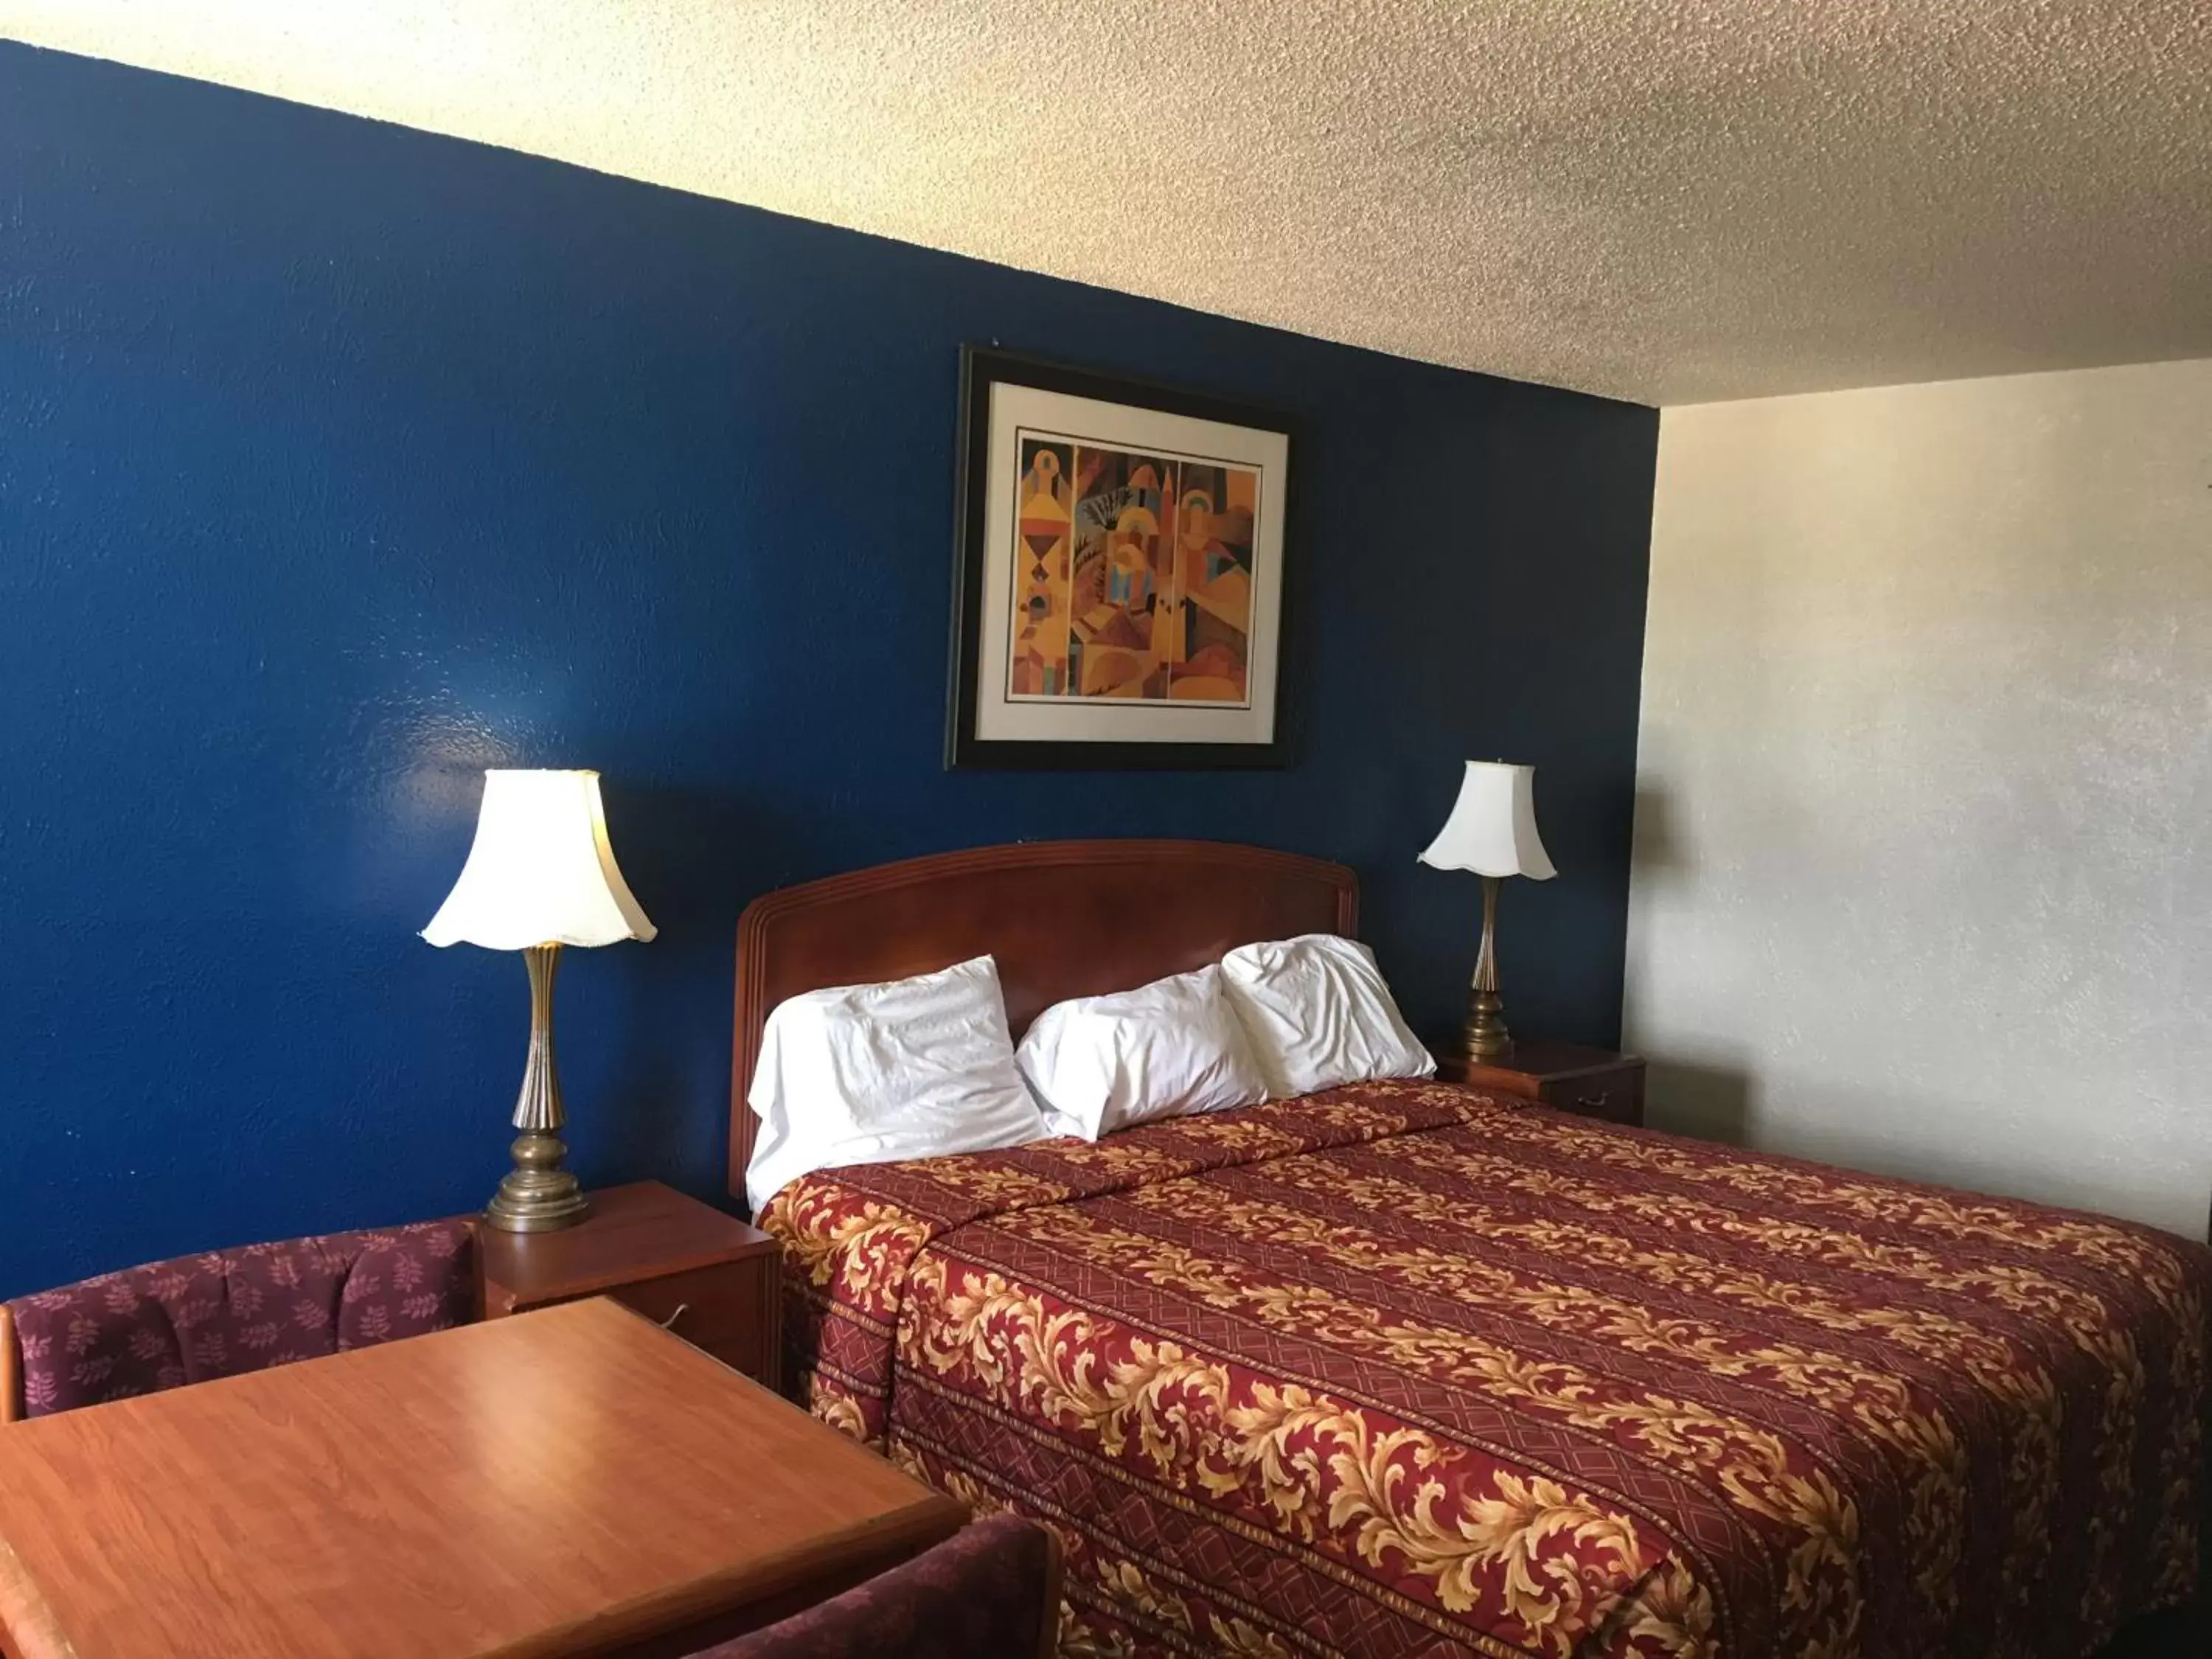 Room Photo in Chaparral Motel